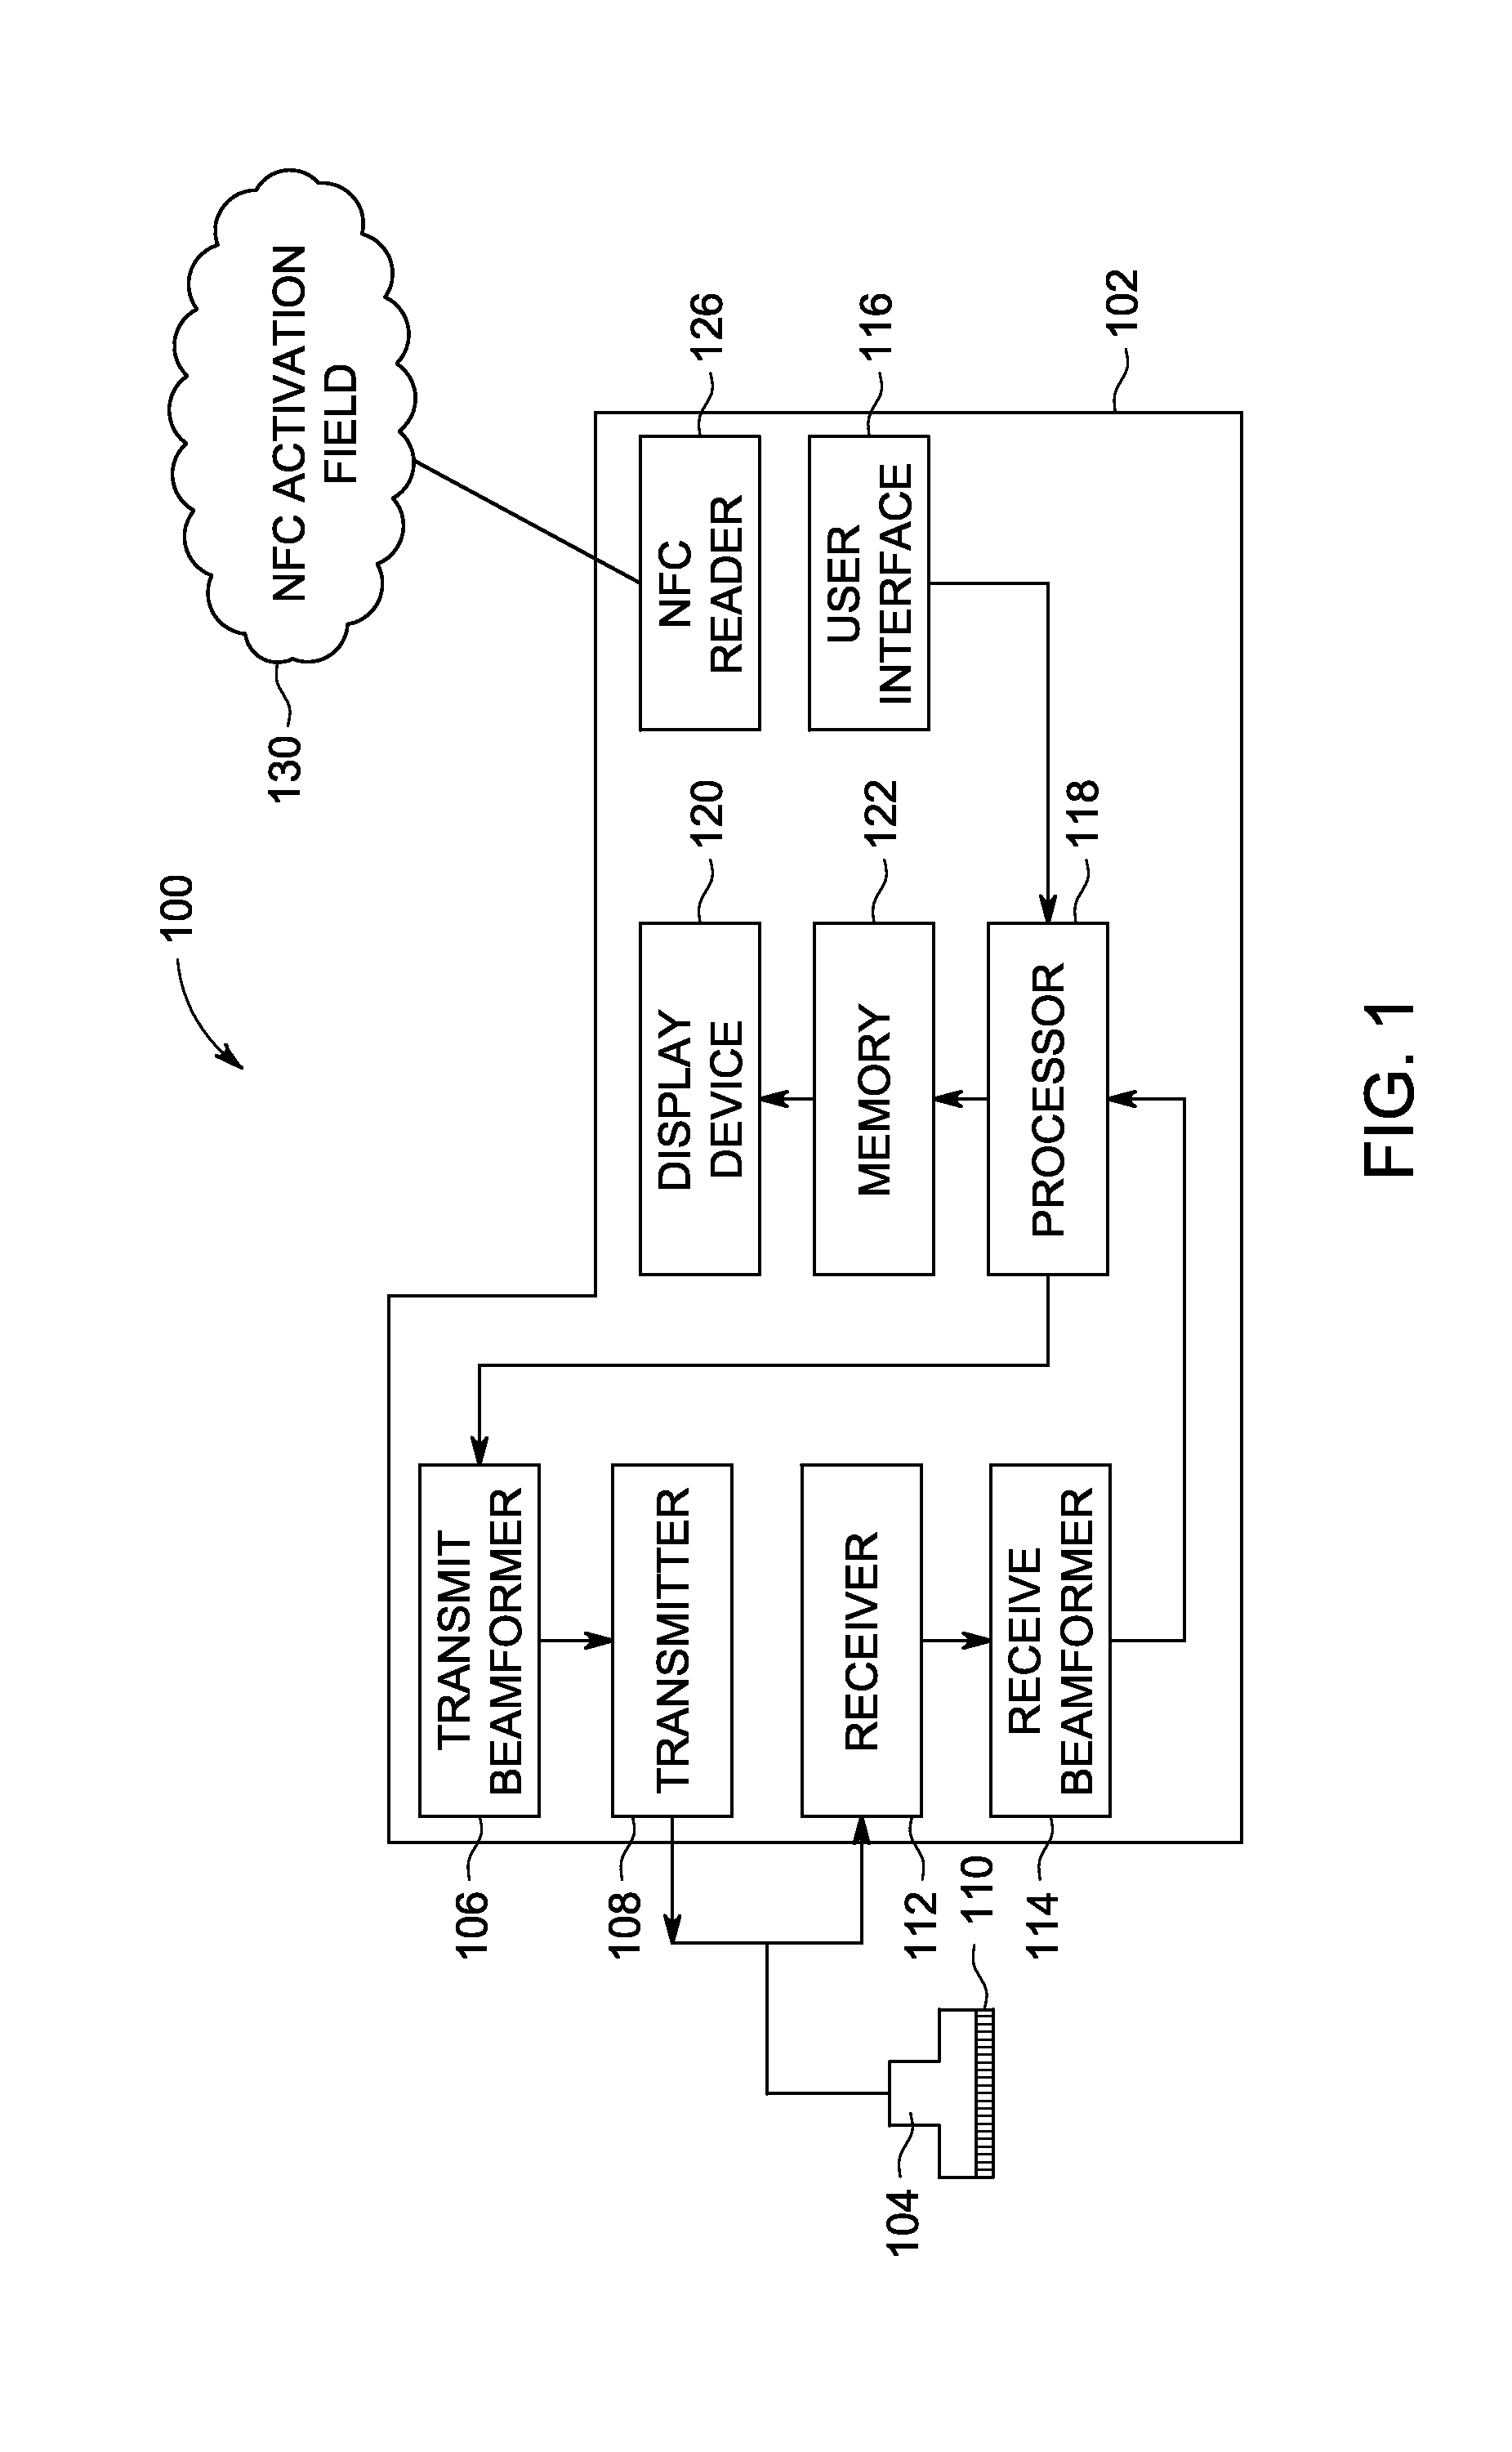 System and Method for Wireless Ultrasound Probe Pairing